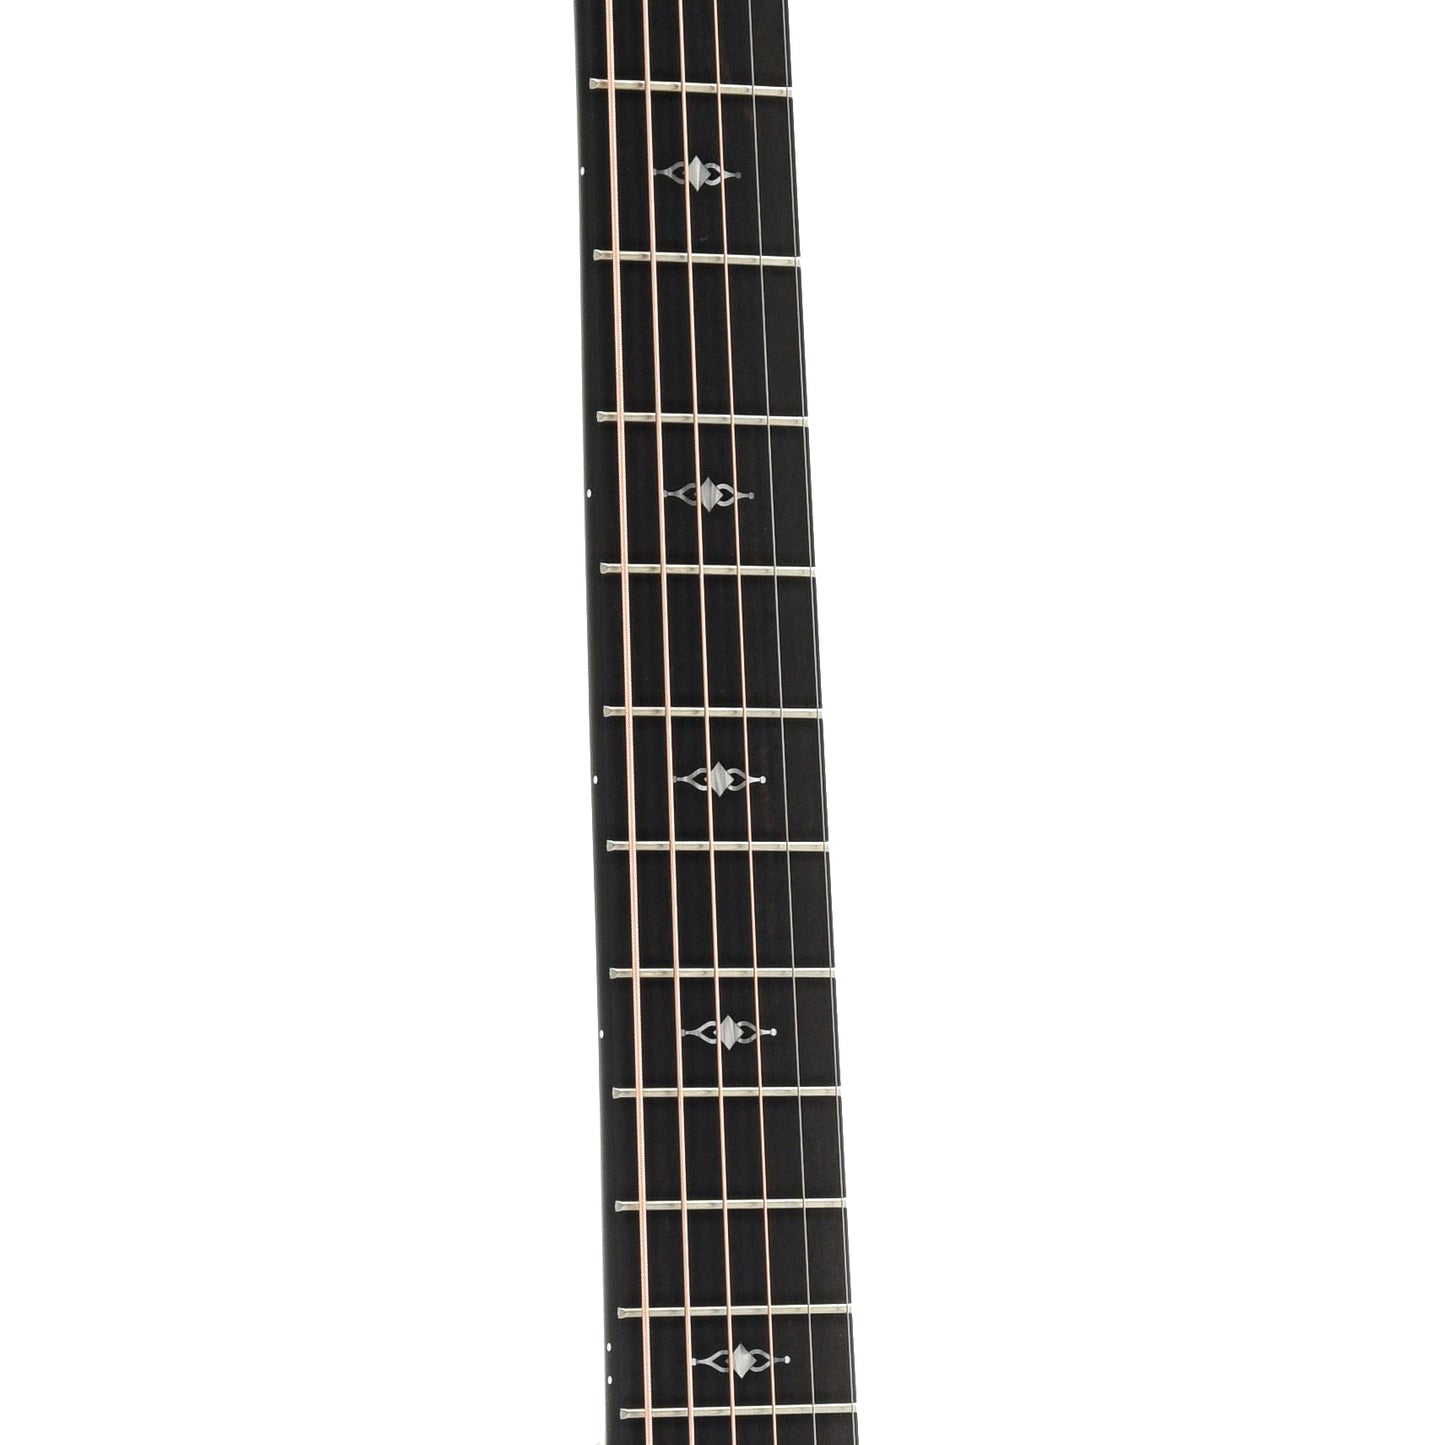 Fretboard of Taylor 314ce Acoustic Guitar